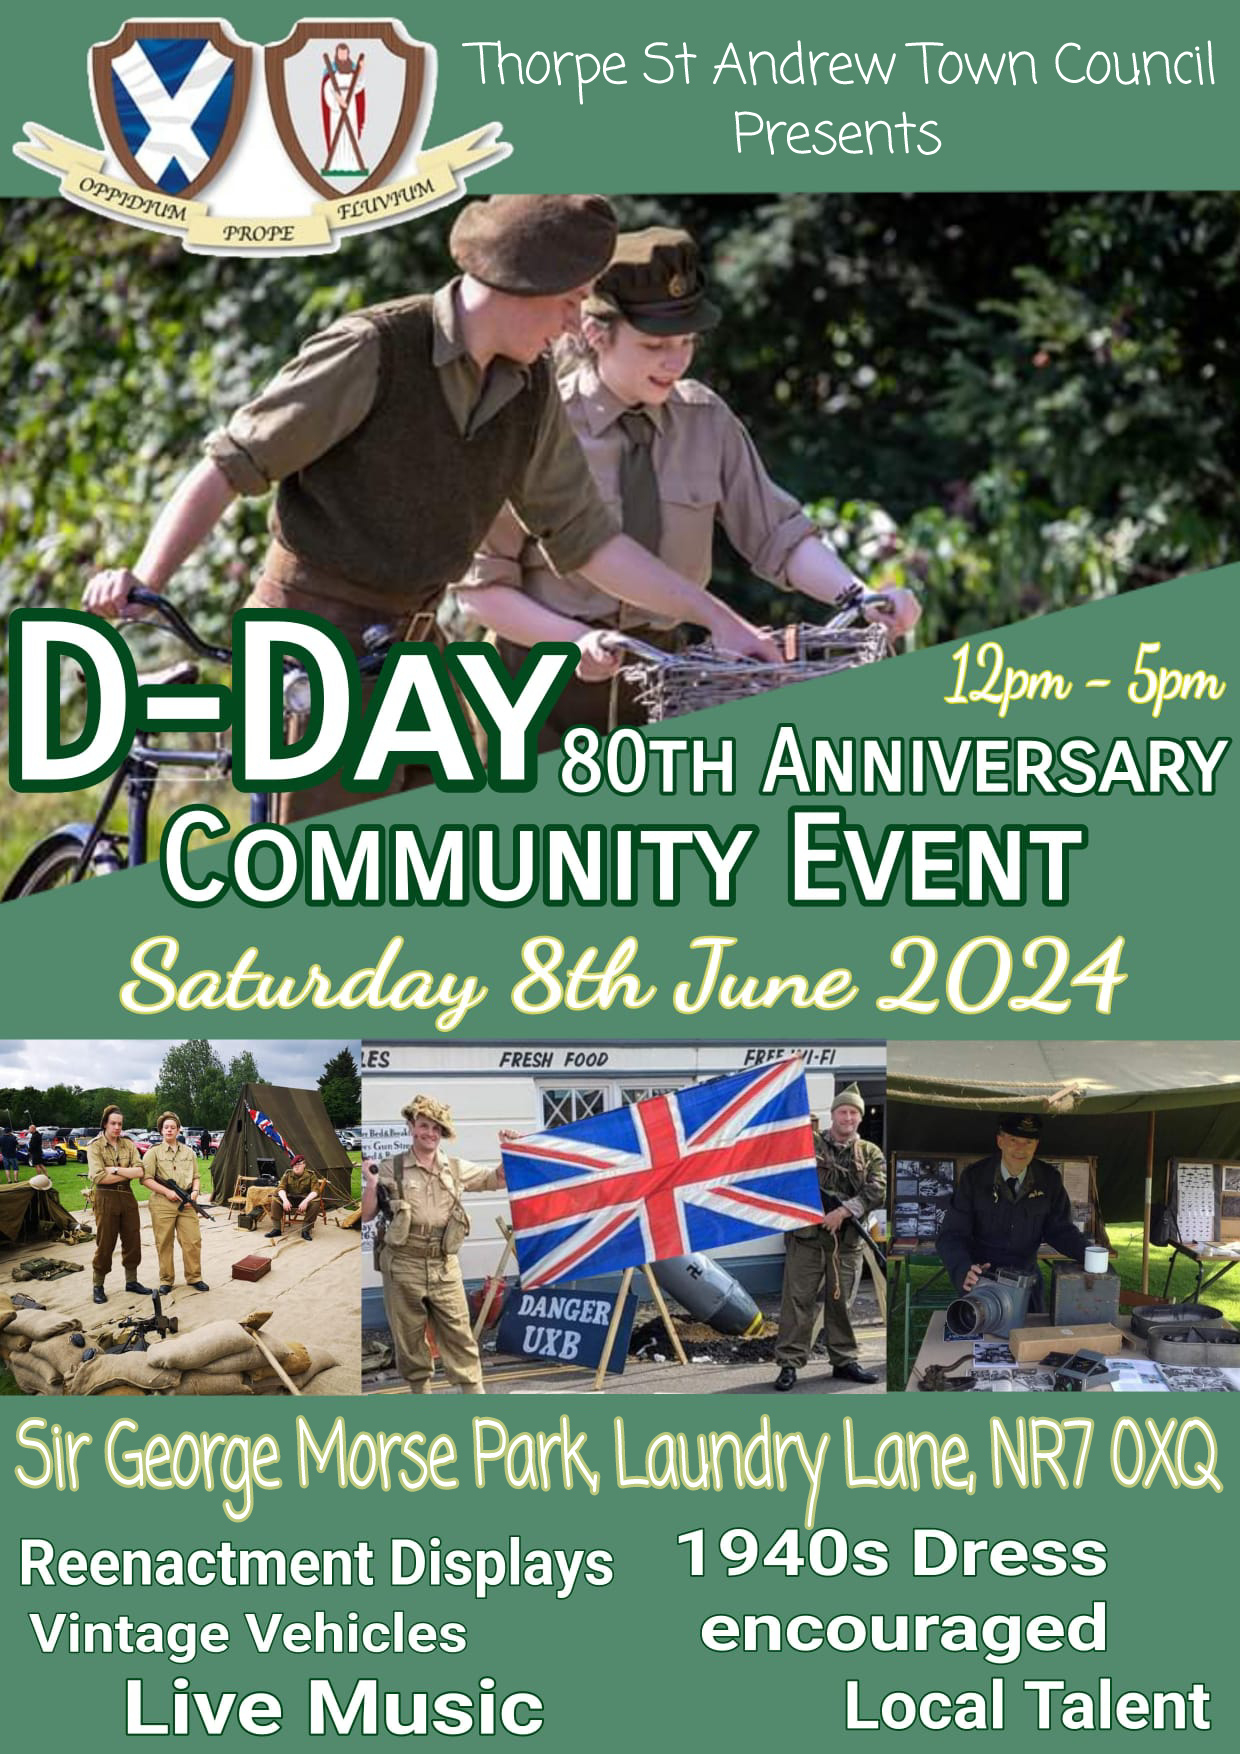 Image Description: Poster featuring image of two people in WW2 dress holding a bike with a basket, with woodland in the background, image of a re-creation bunker with two soldiers, one holding a replica rifle, image of a two soldiers holding up a union jack flag and image of a man in WW2 dress behind his gazebo stall displaying 1940s memorabilia. Text reads "12pm - 5pm. D-Day 80th Anniversary Community Event. Saturday 8th June 2024. Sir George Morse Park, Laundry Lane, NR7 0XQ. Re-enactment Displays. Vintage Vehicles. Live Music. 1940s Dress encouraged. Local Talent"